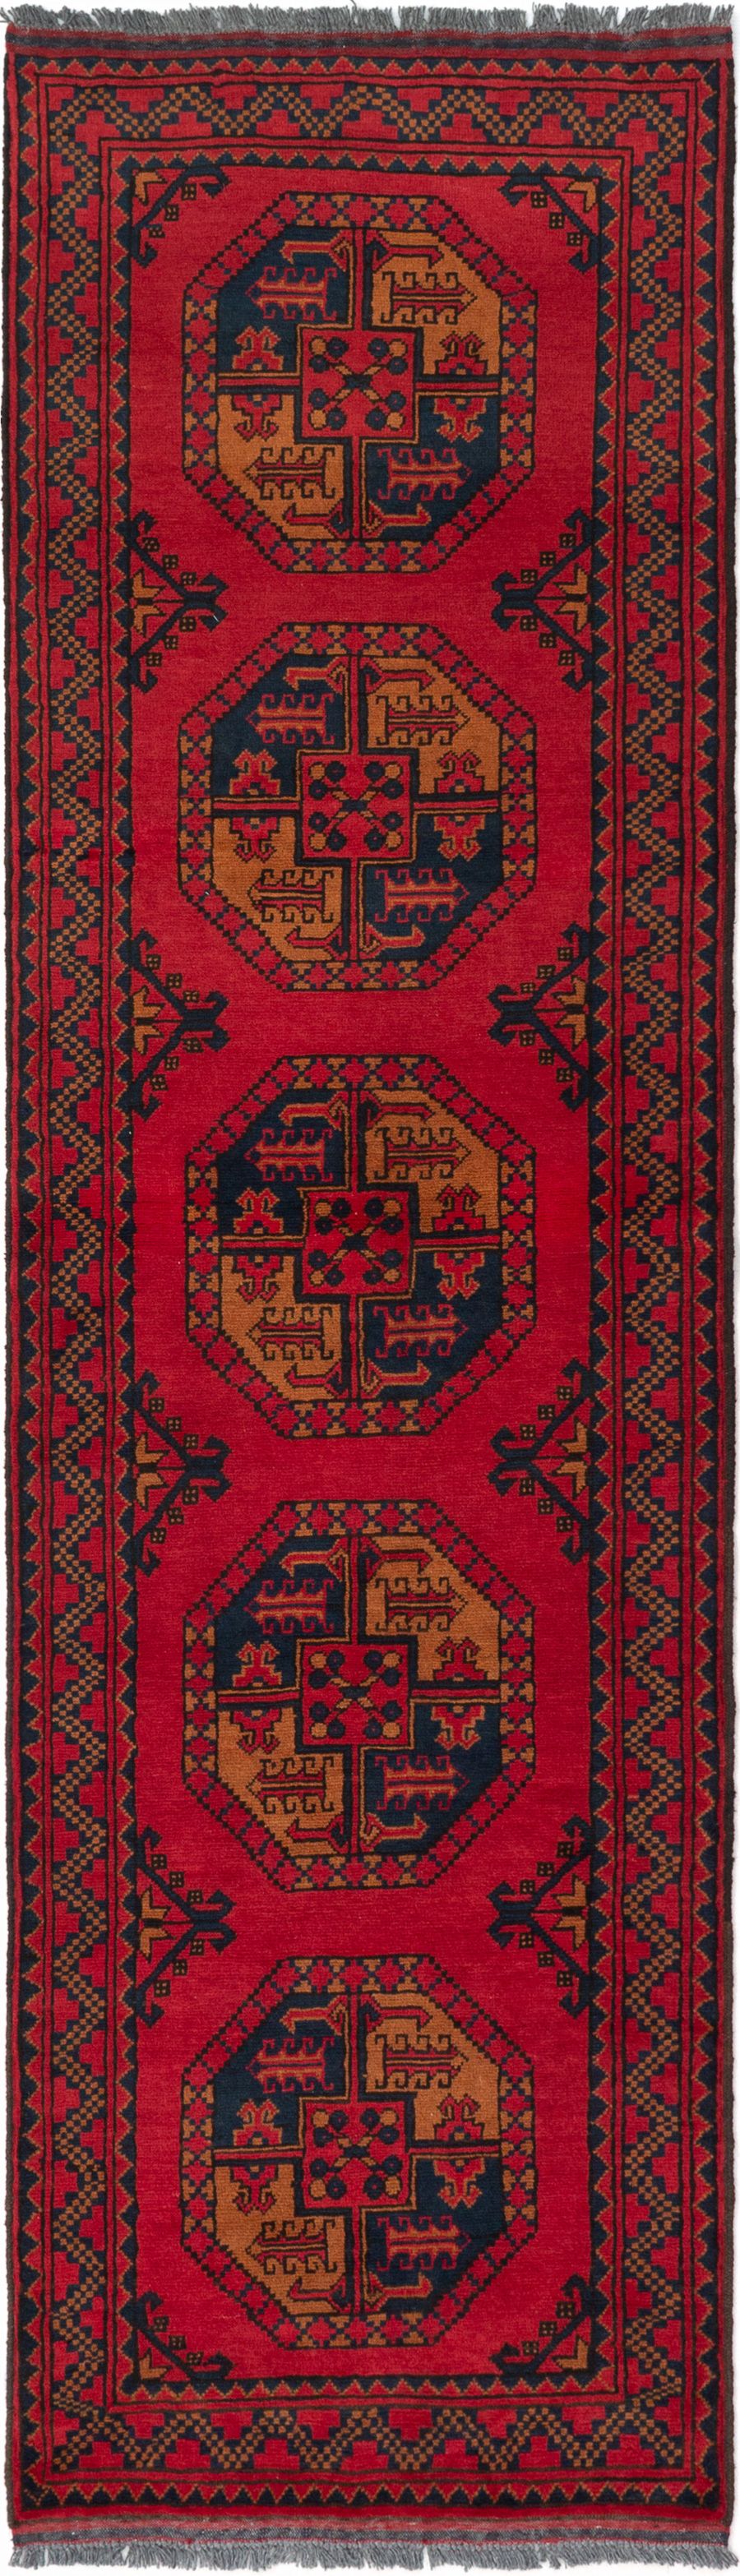 Hand-knotted Finest Kargahi Red Wool Rug 2'9" x 9'8" Size: 2'9" x 9'8"  